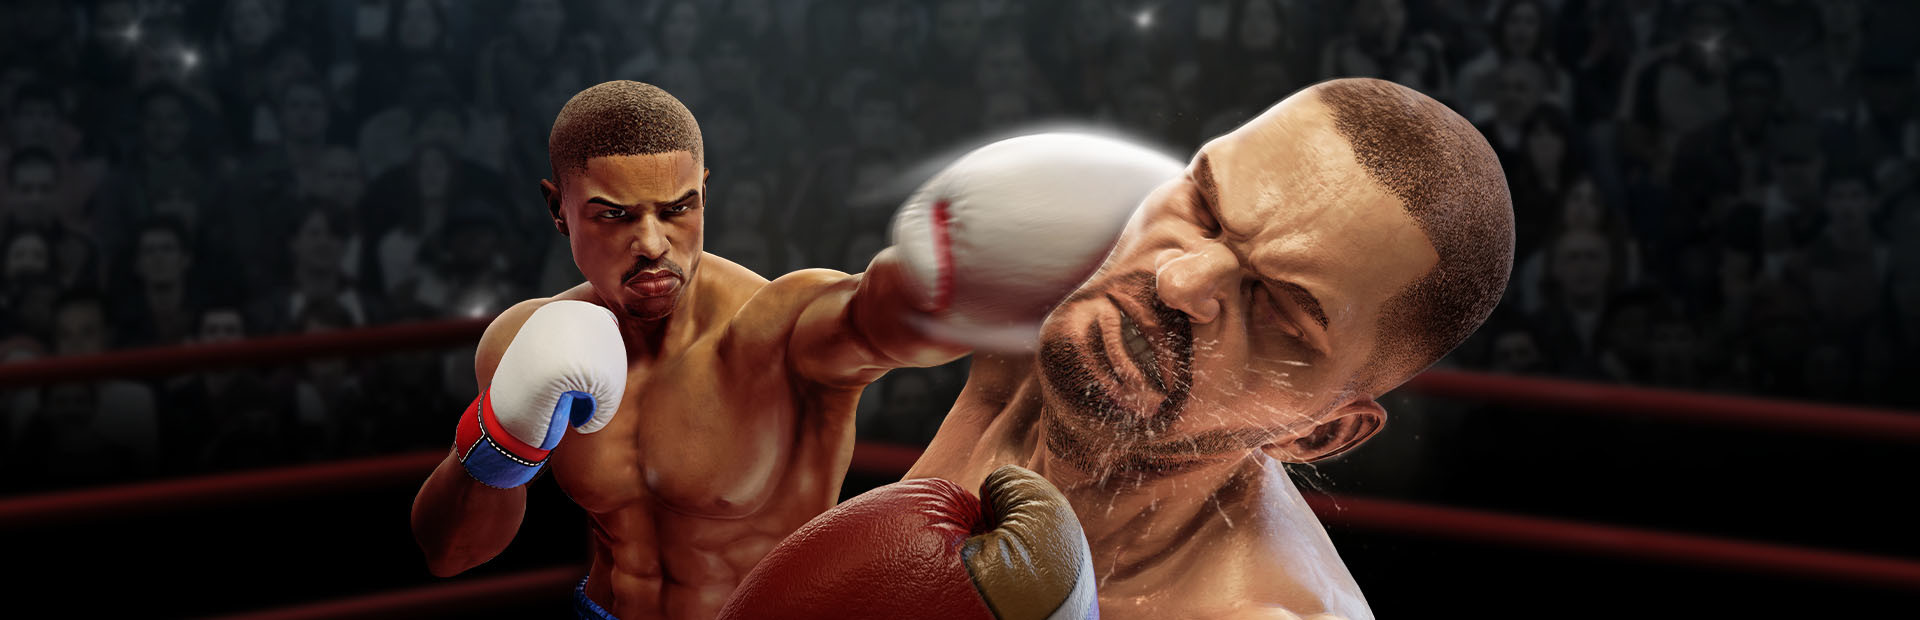 Big Rumble Boxing: Creed Champions cover image